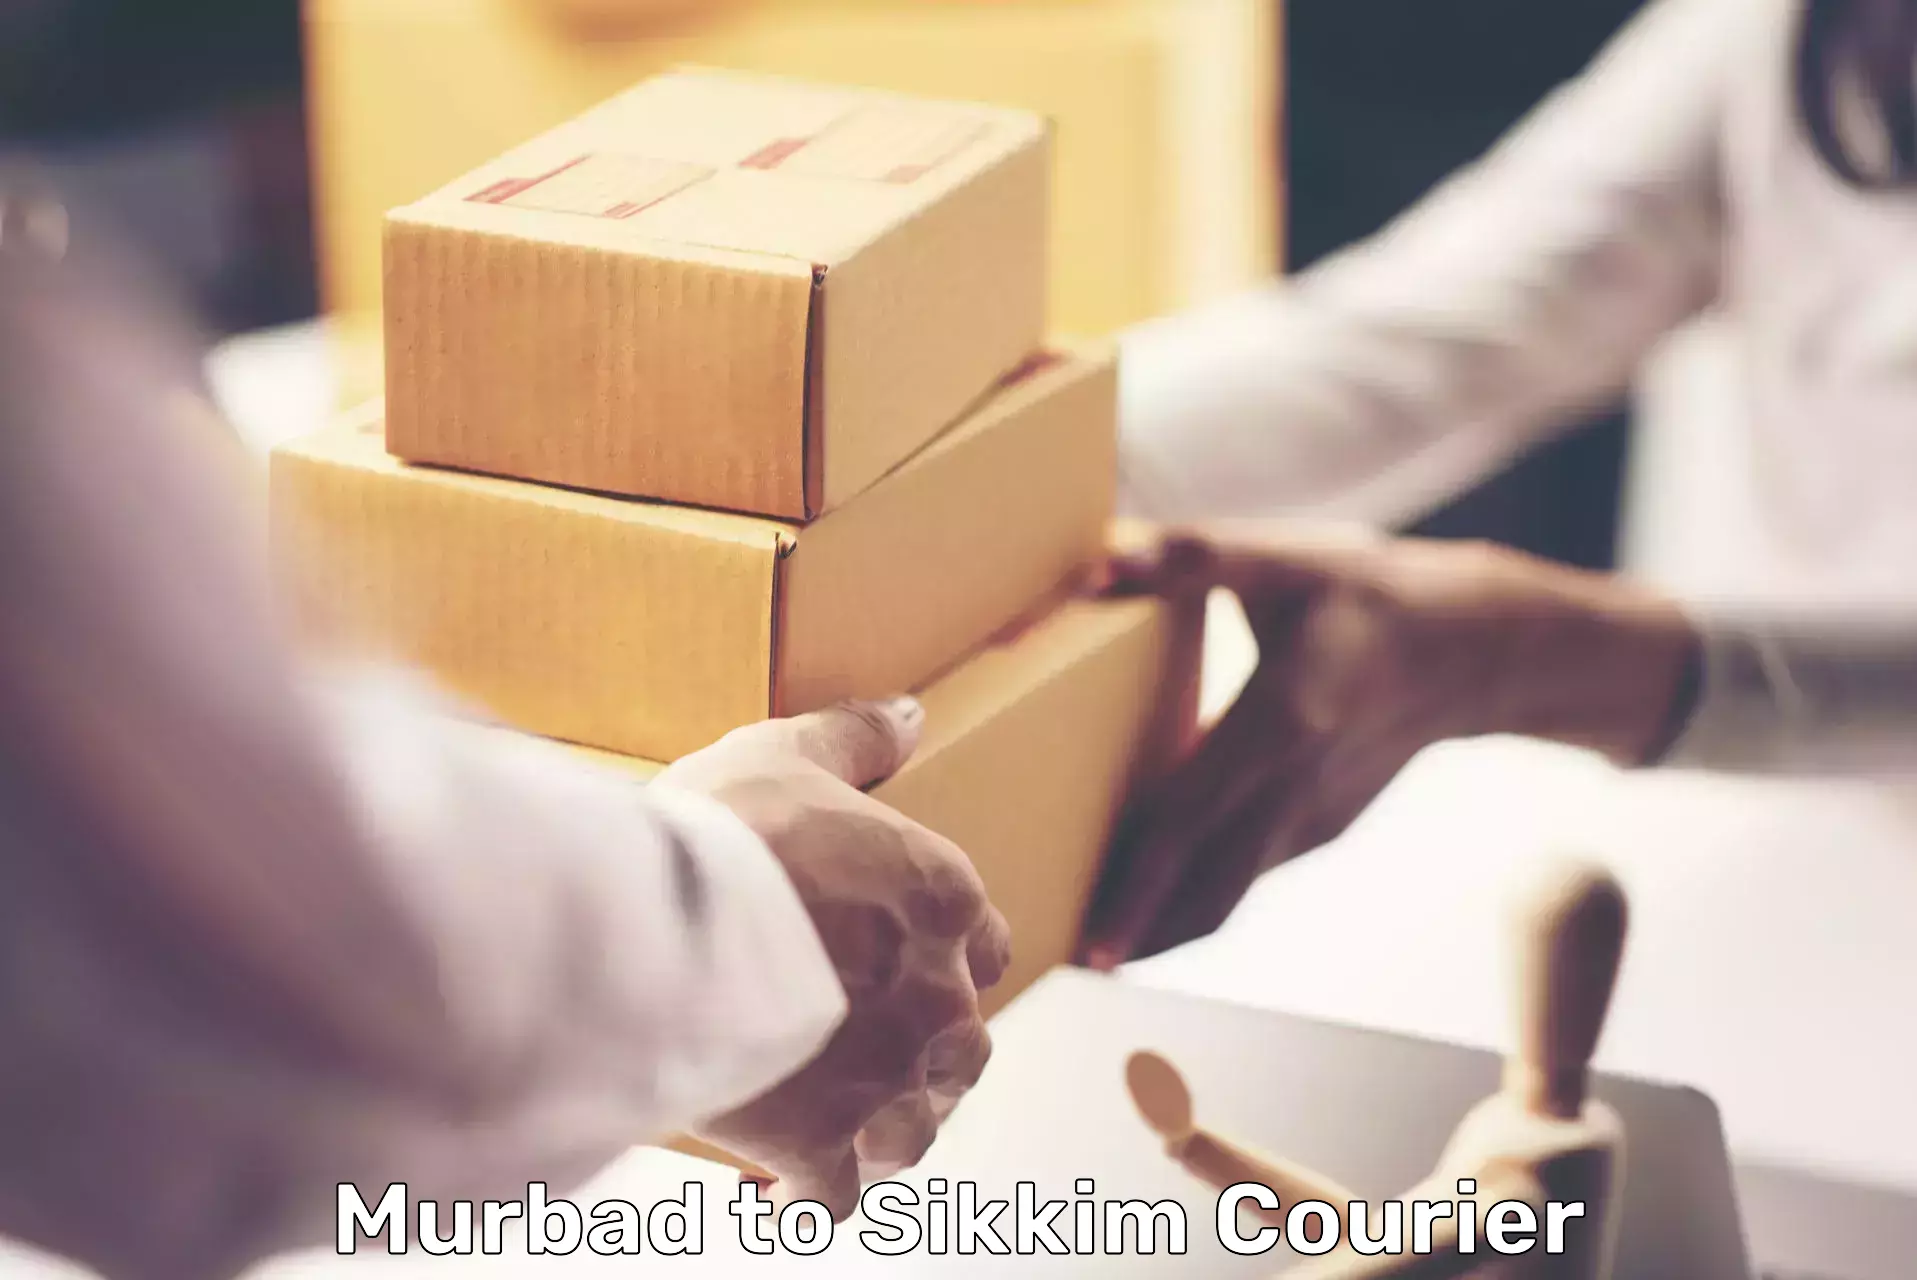 Affordable parcel service Murbad to Pelling